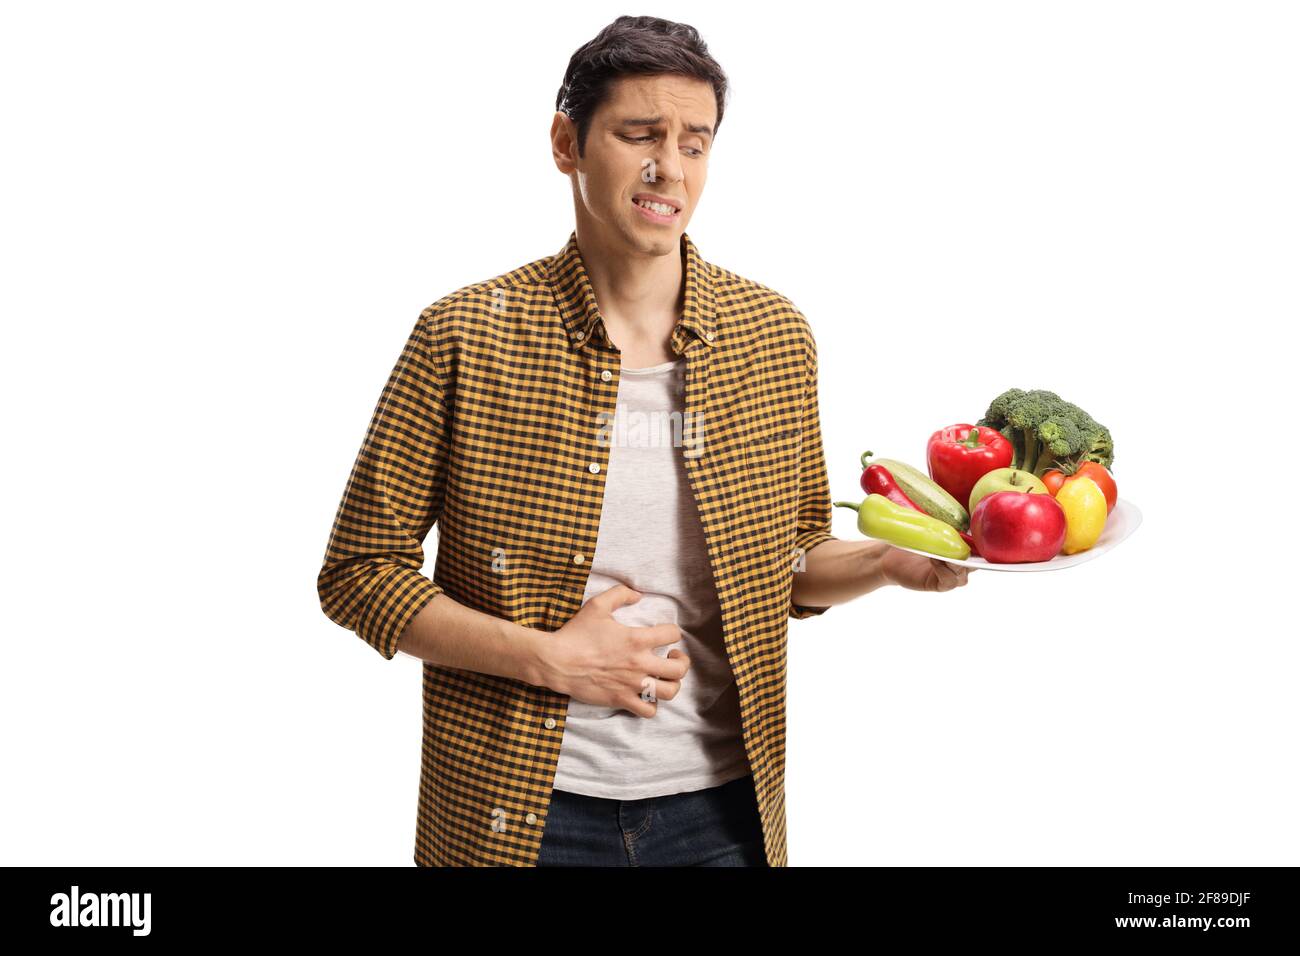 Young man with a stomach ache holding a plate of vegetables isolated on white background Stock Photo